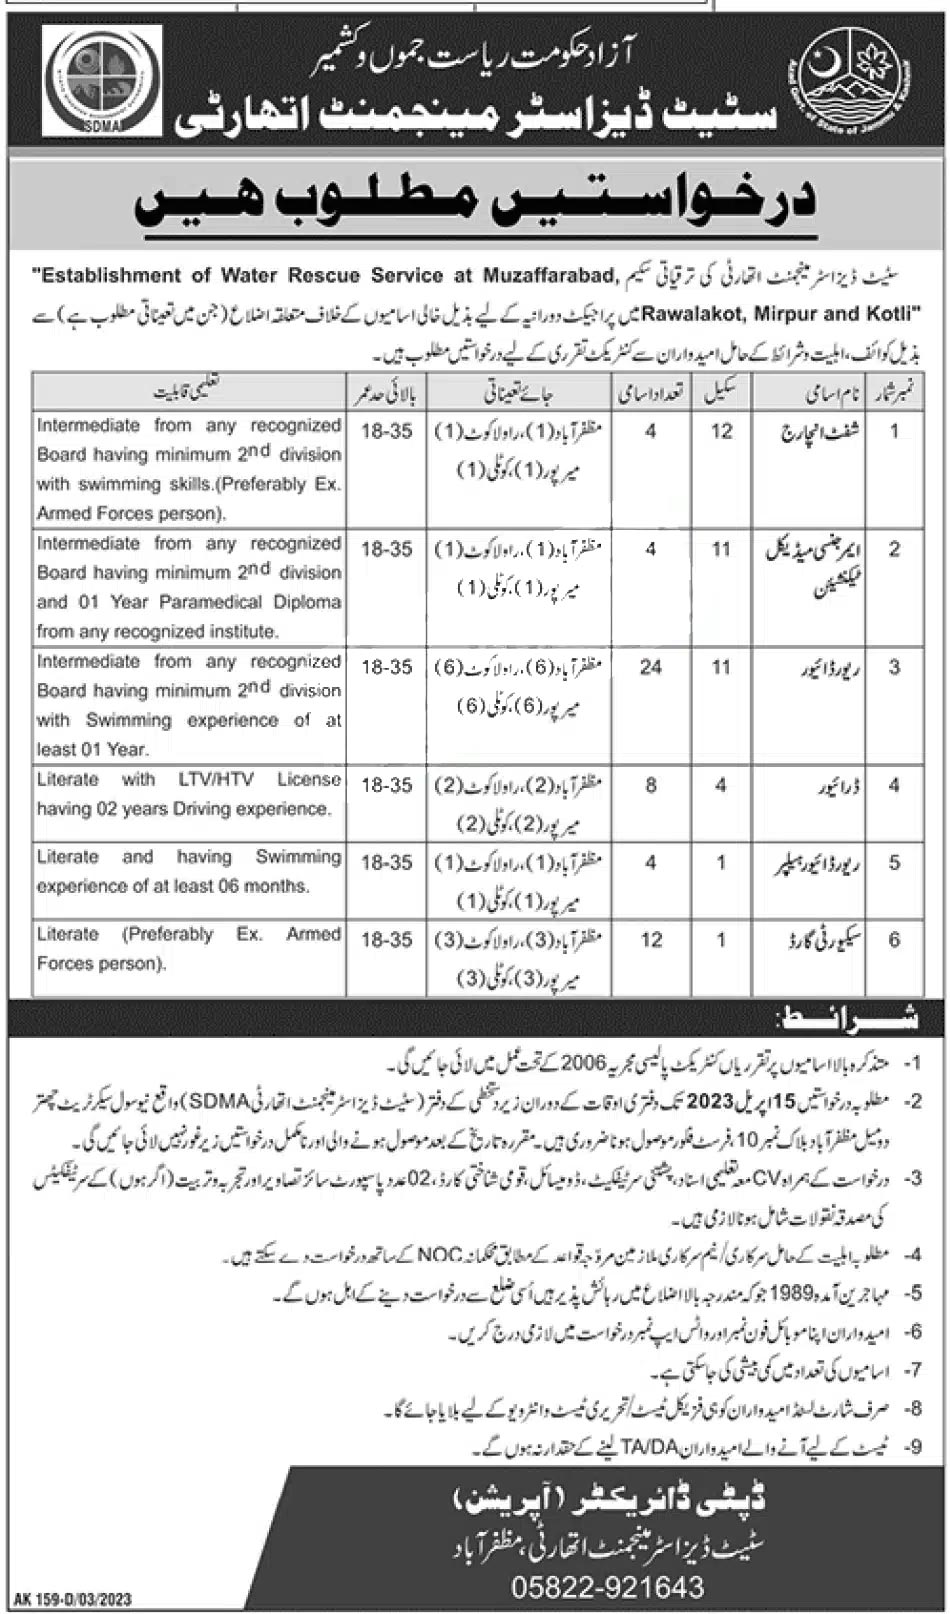 State Disaster Management Authority Ajk Jobs 2023